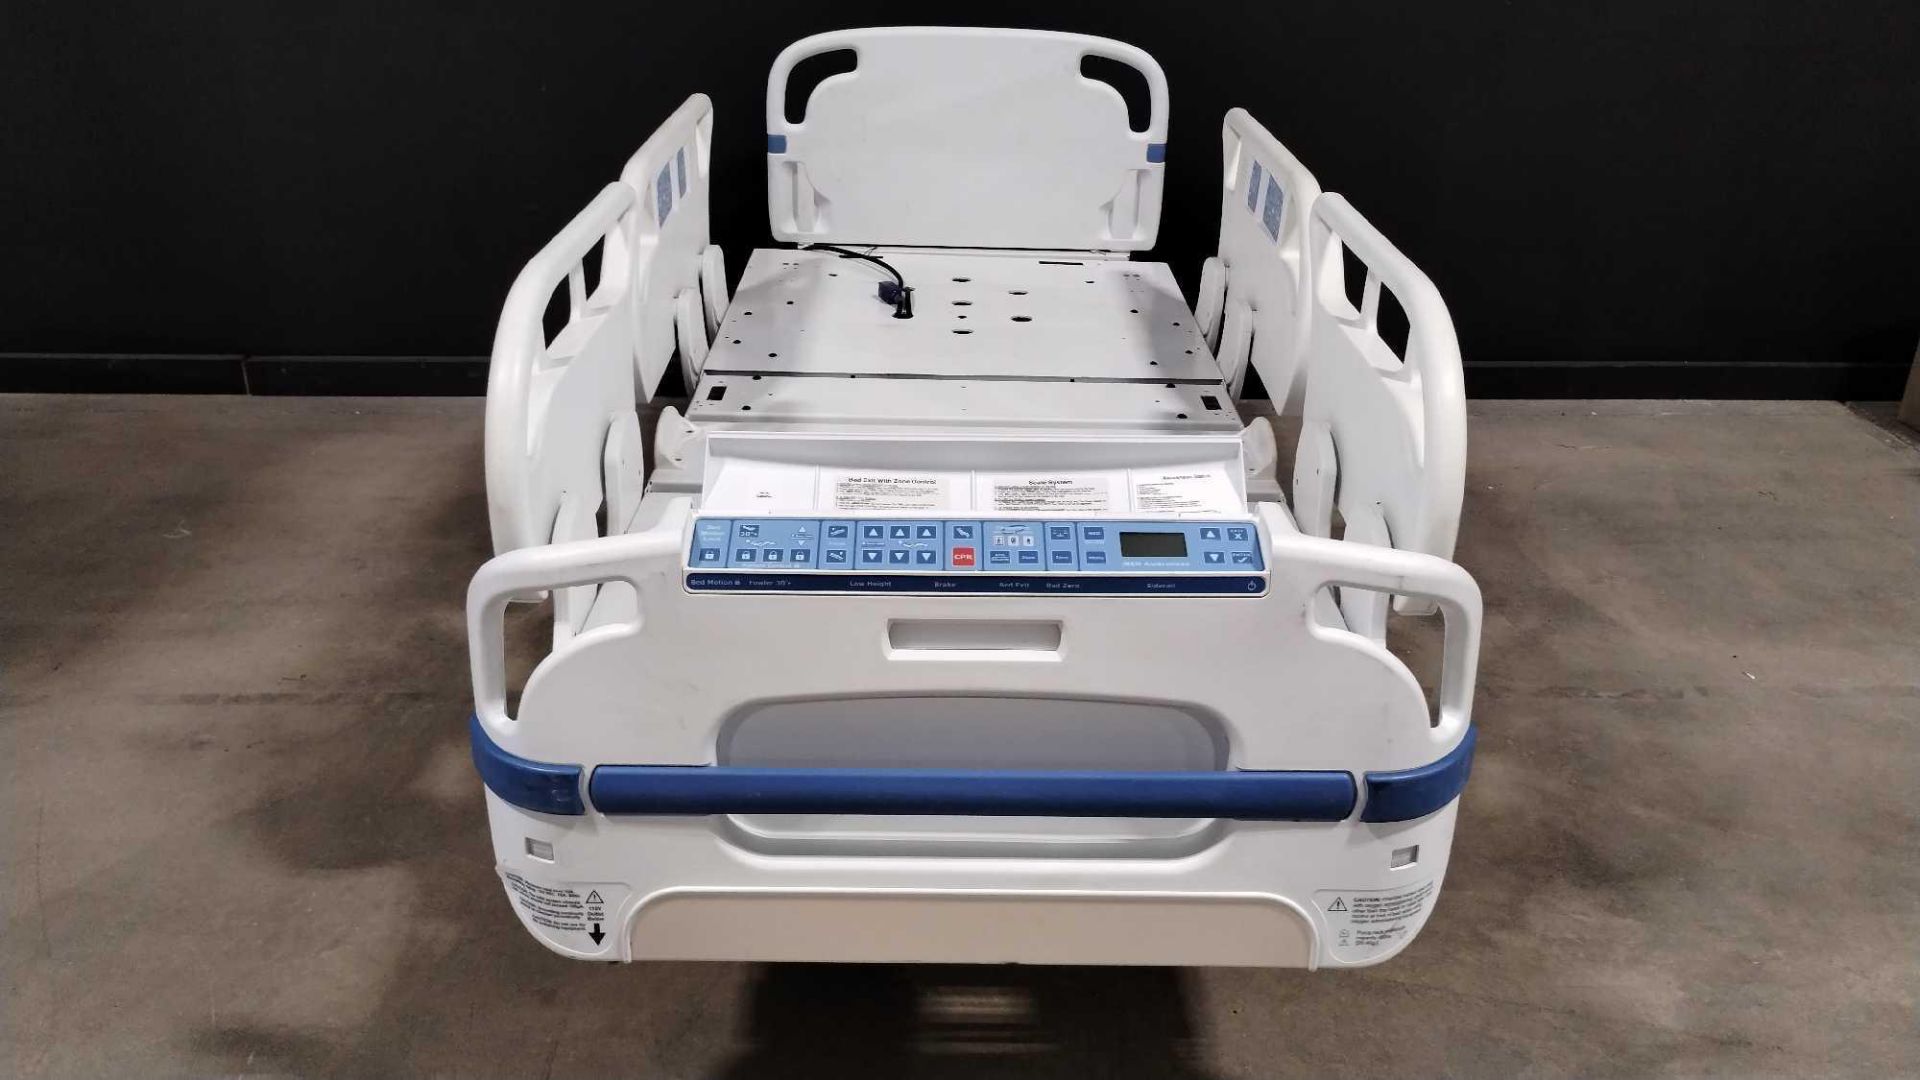 STRYKER 3002 S3 HOSPITAL BED - Image 2 of 4